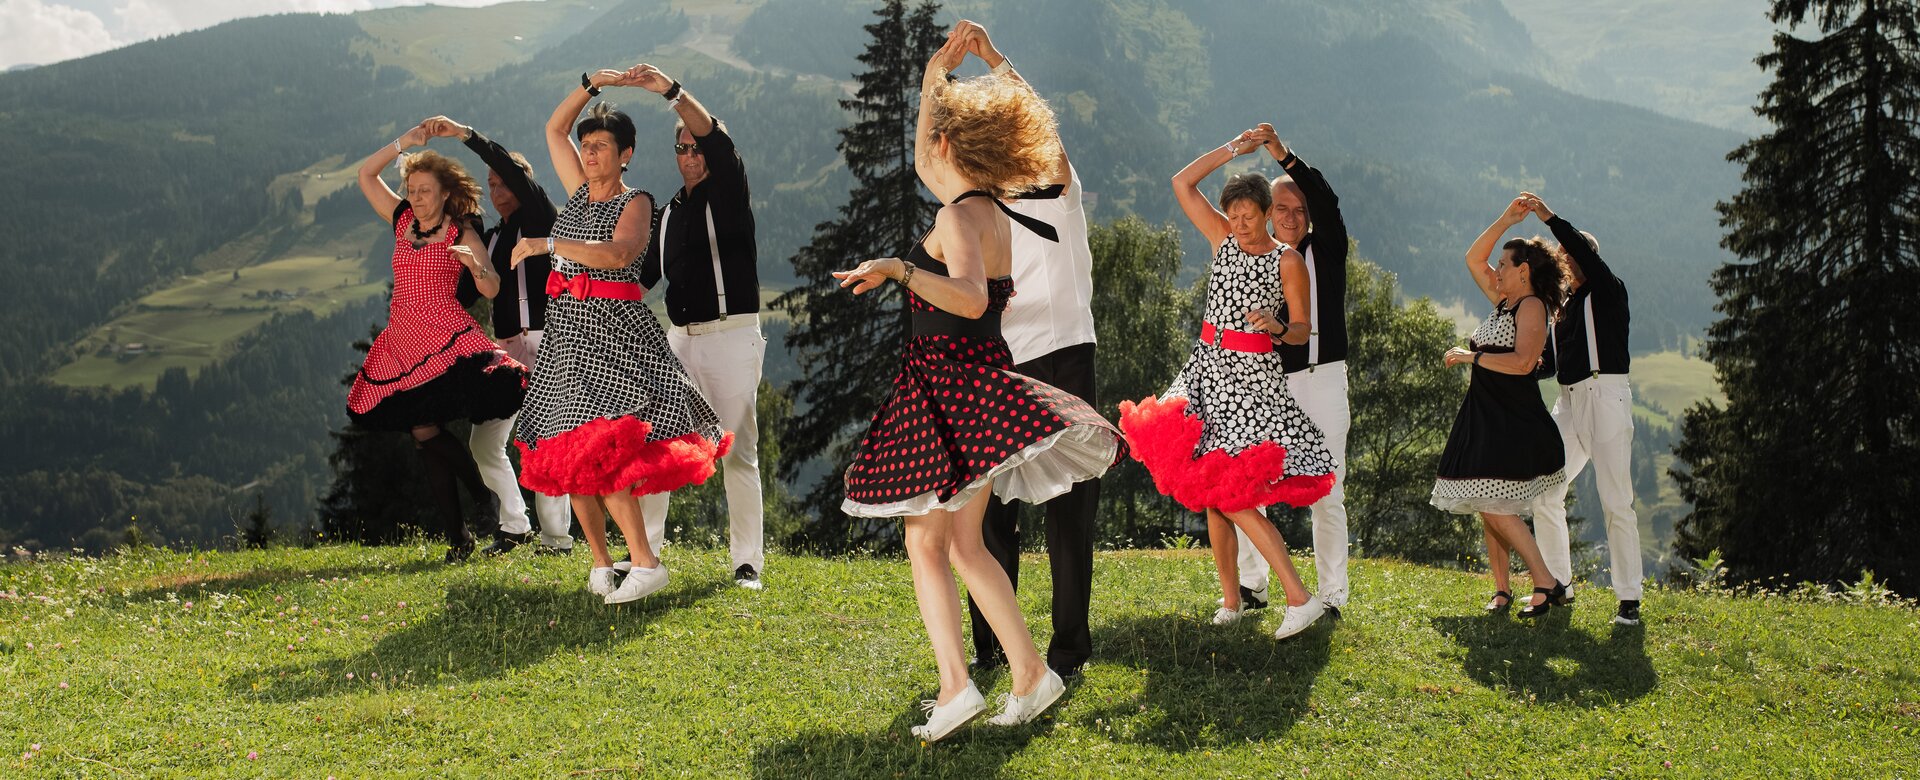 Five dancing couples spin on a meadow | © TVB Hofgastein, Marktl Photography